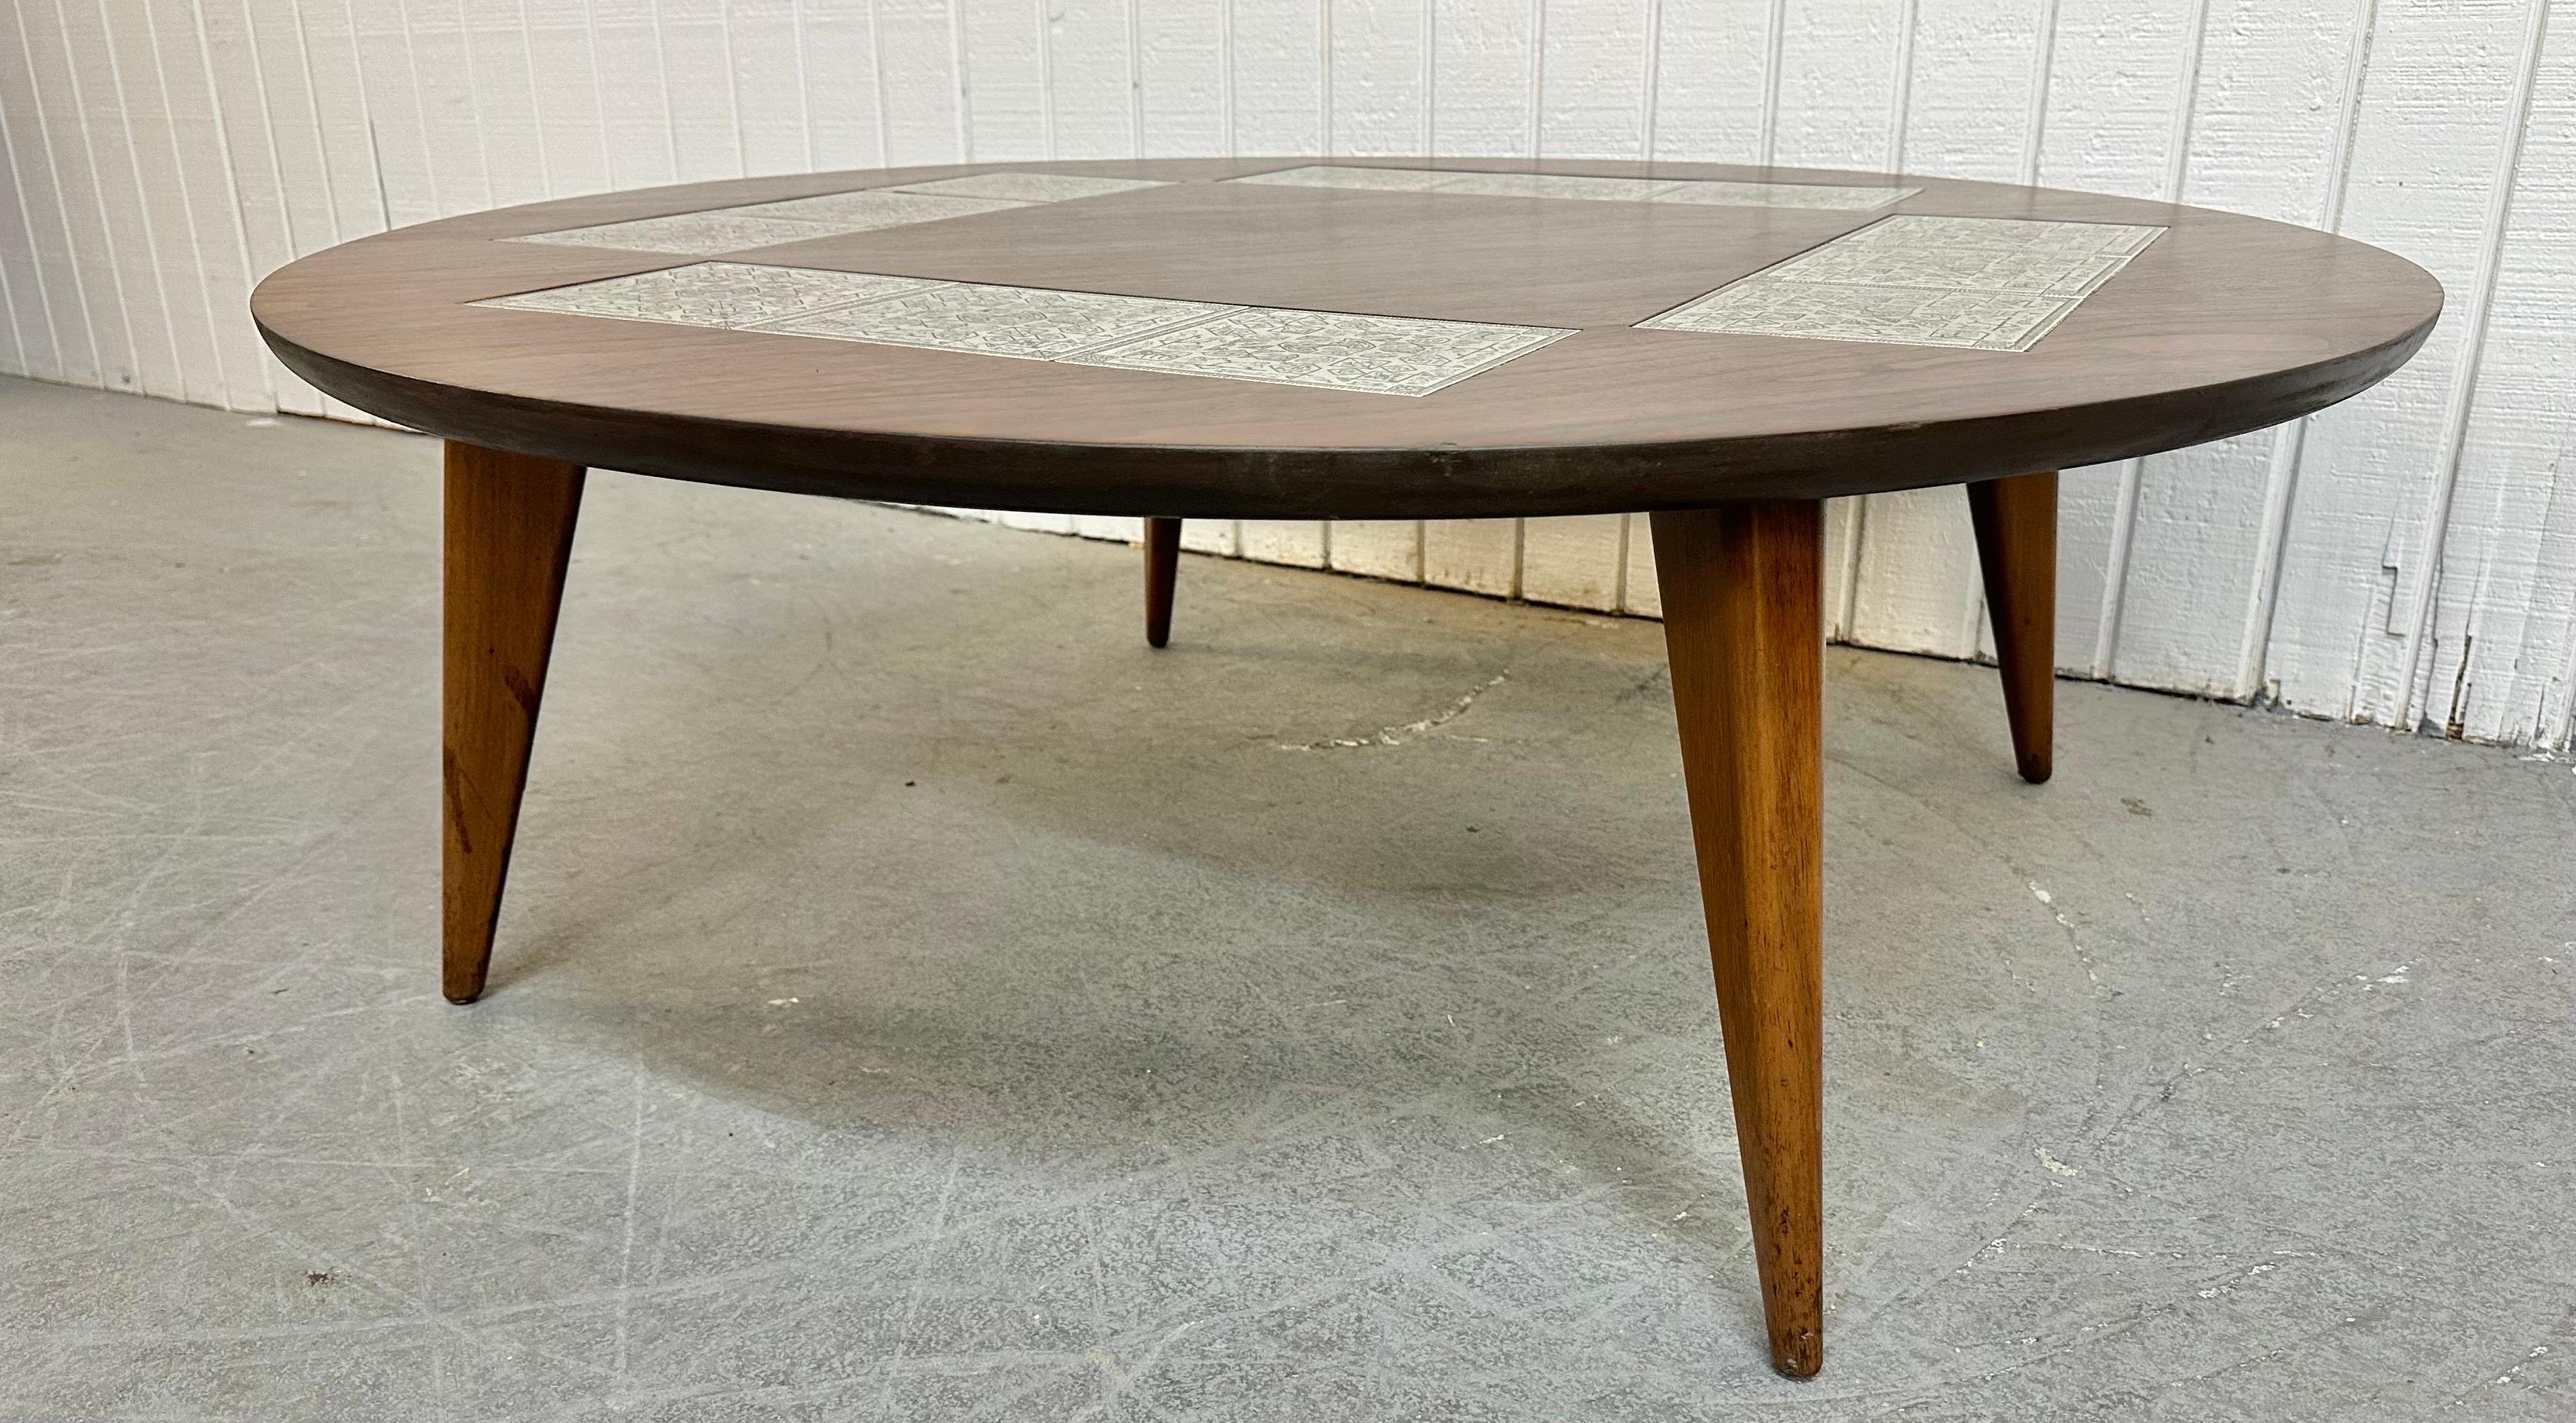 This listing is for a Mid-Century Modern Round Walnut Tile Top Coffee Table. Featuring a round walnut top, Aztec style tiles, modern legs, and a beautiful walnut finish. This is an exceptional combination of quality and design!